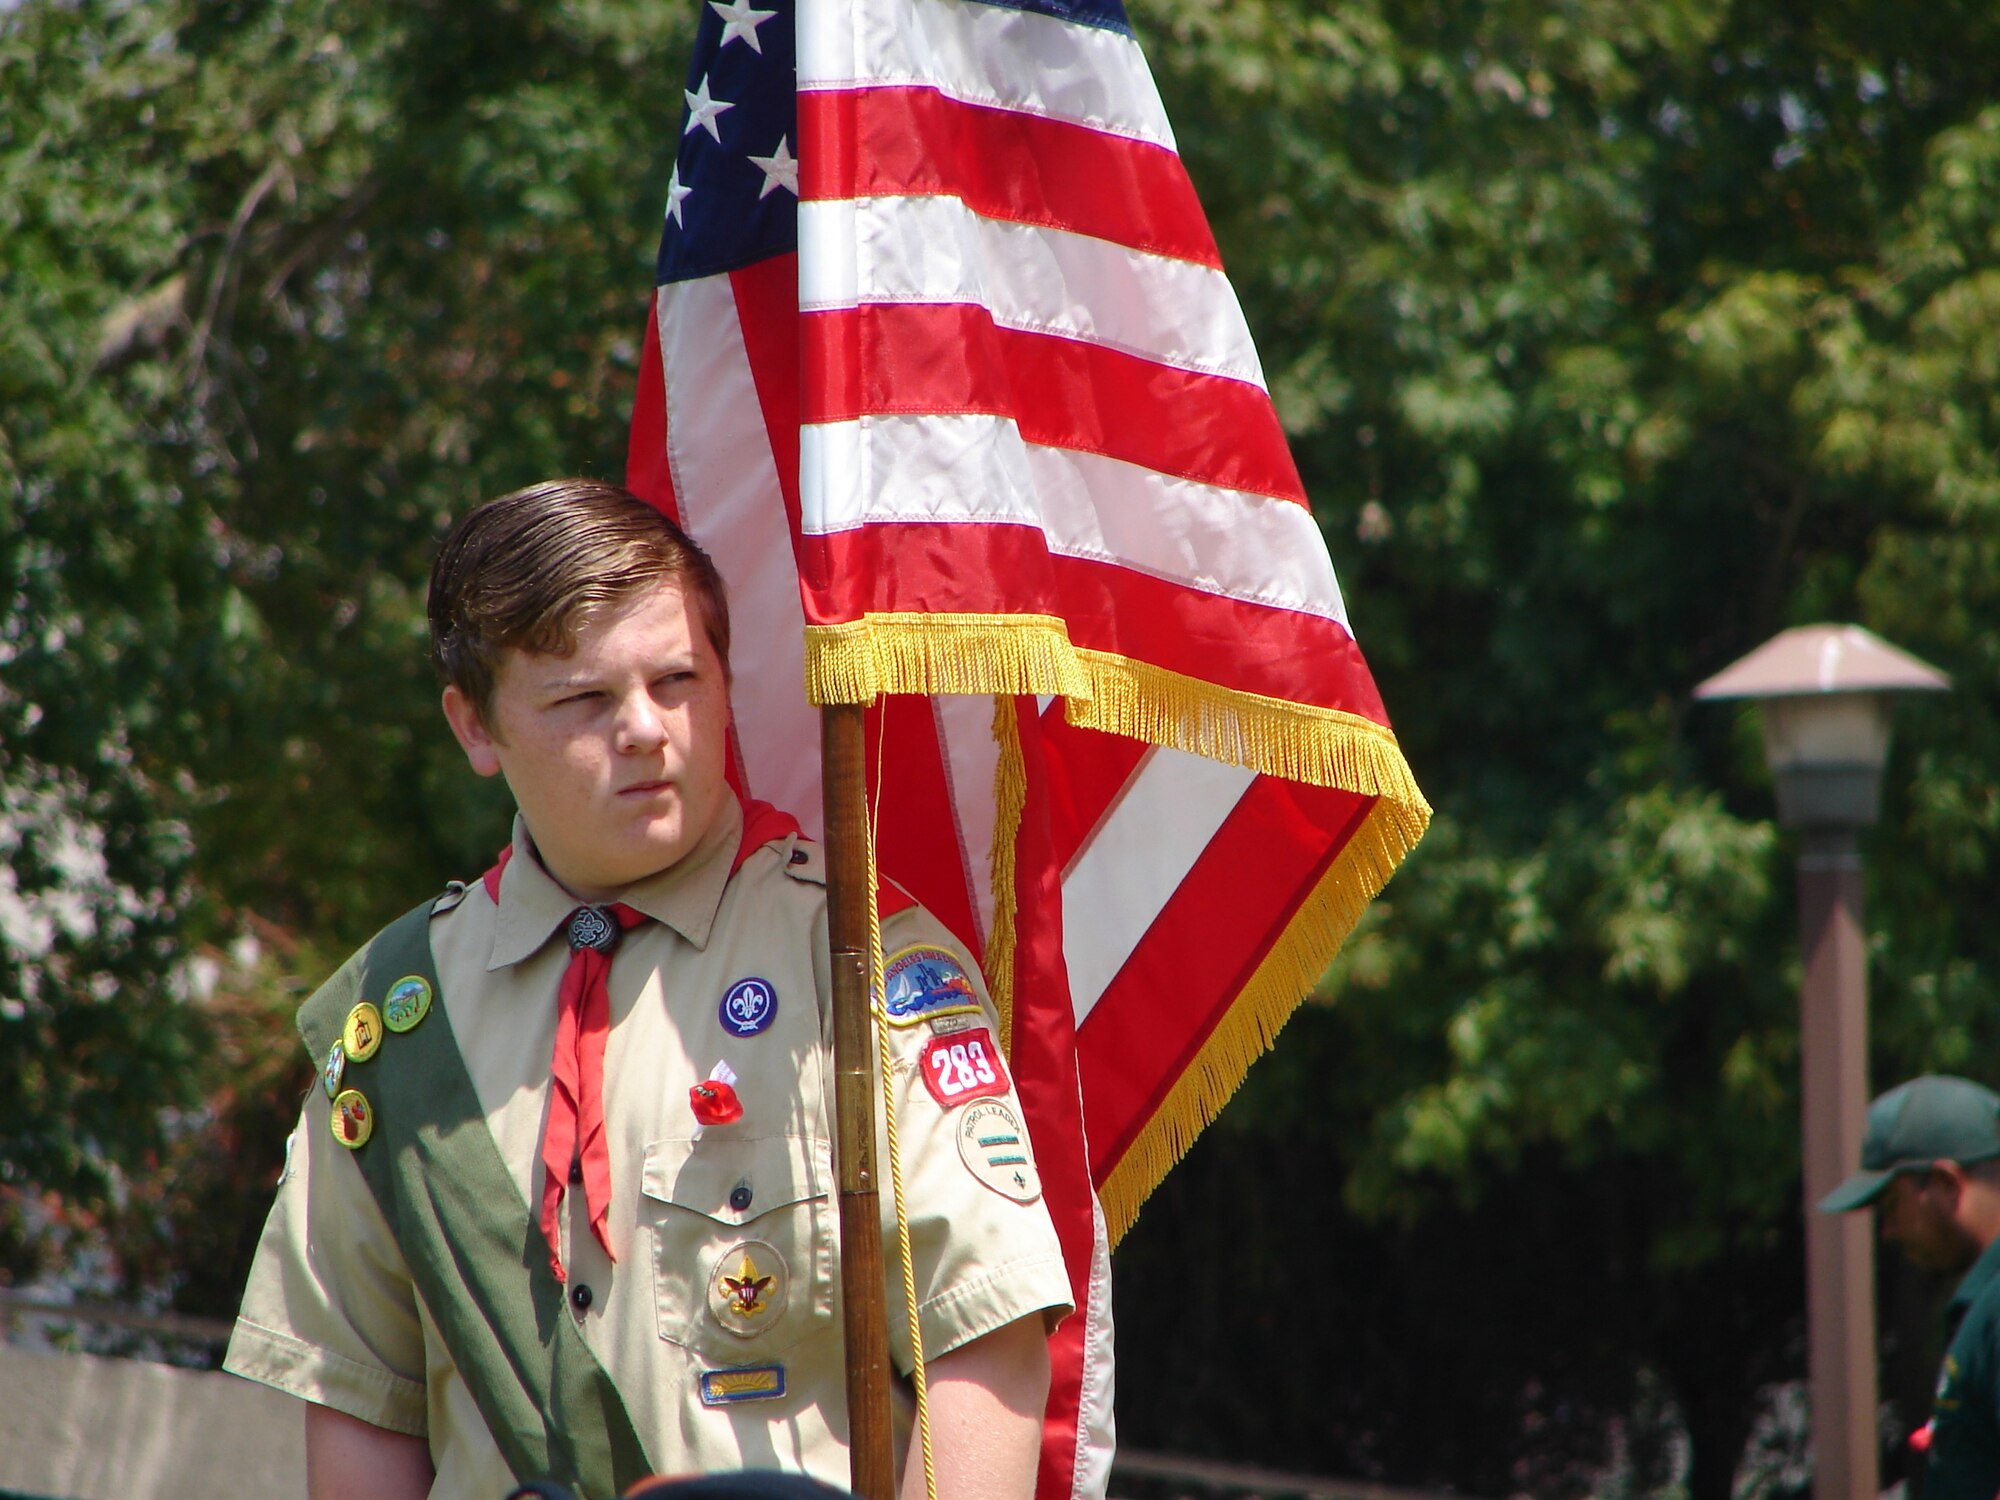 A member of Boy Scout Troop 283 participated in the 59th Annual Inglewood Memorial Day Service, May 28. The service honored fallen heroes from the city. Col. Douglas Kendall, Spacelift Range Group Commander was the keynote speaker at the event.